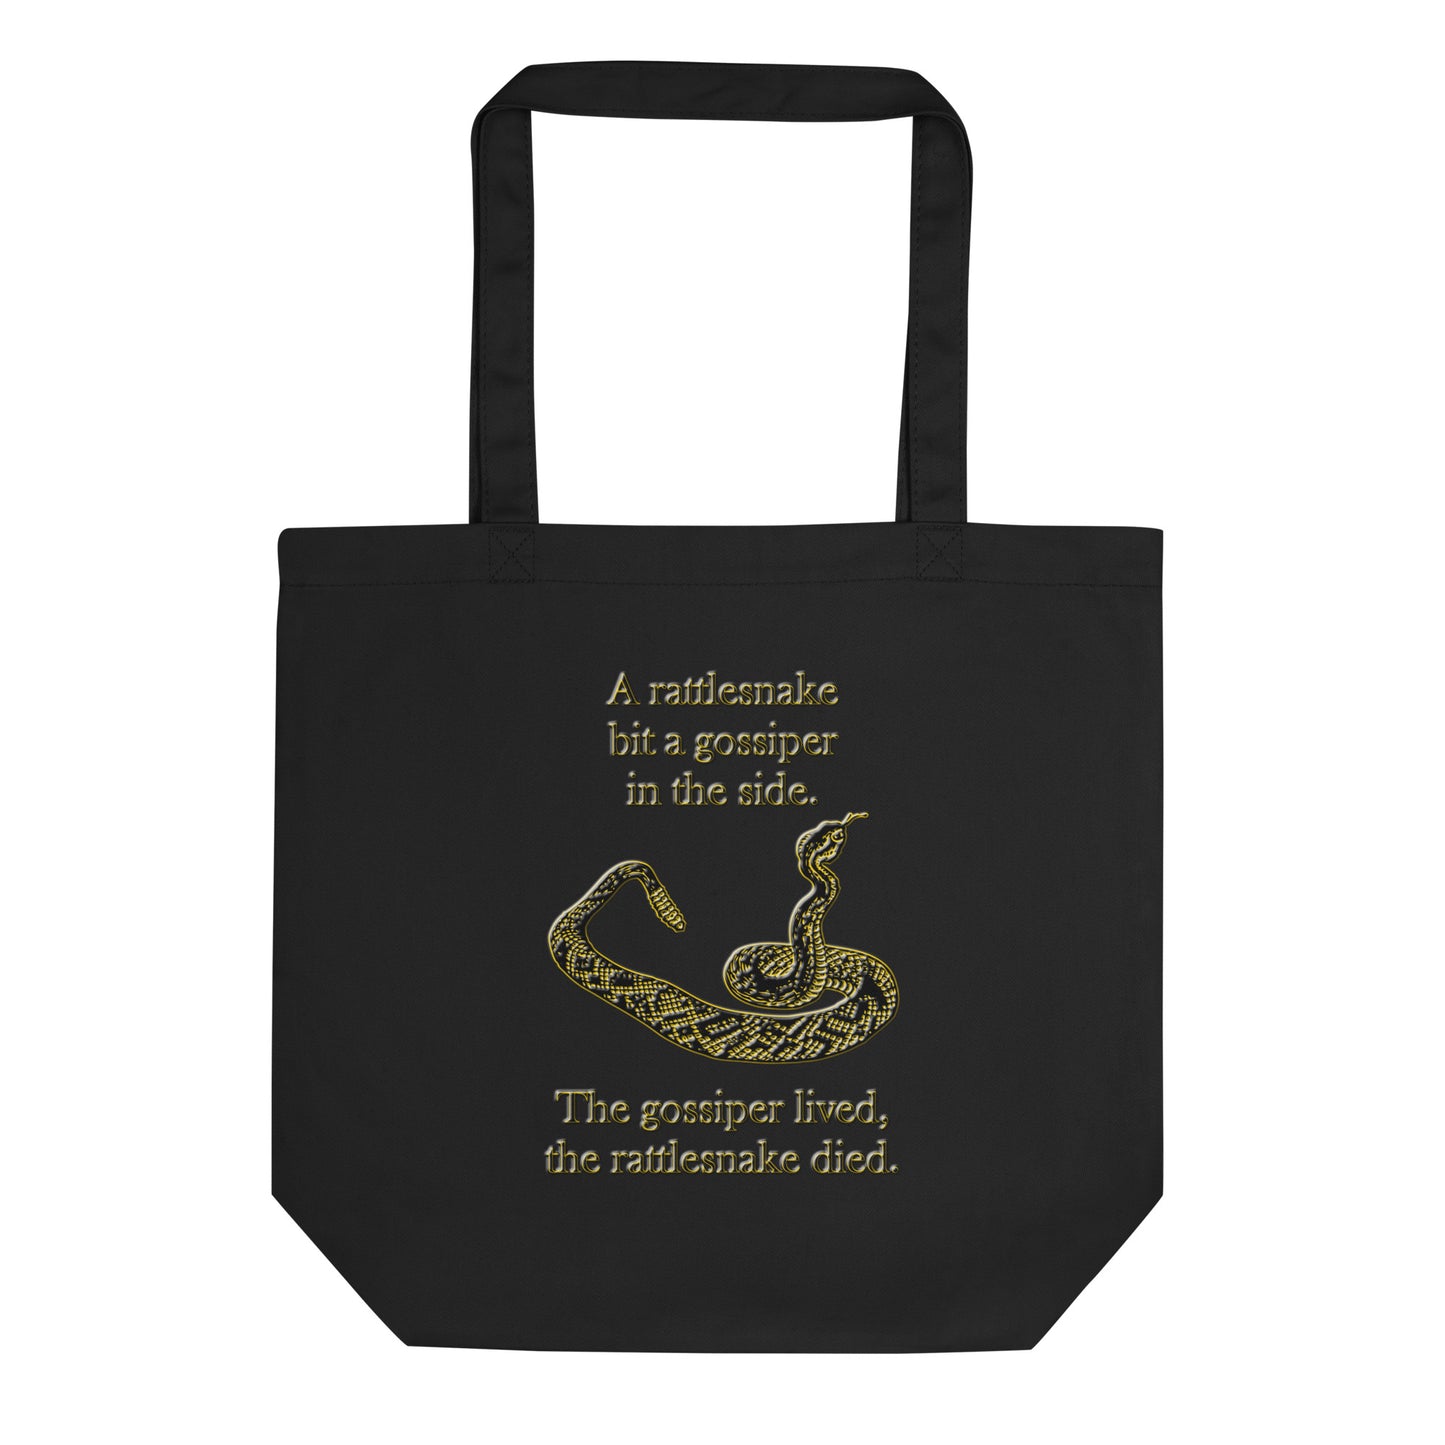 A010 Tote – Eco Tote Bag Featuring a Rattlesnake Graphic and the Text “A Rattlesnake Bit a Gossiper in the Side – The Gossiper Lived, The Rattlesnake Died.”